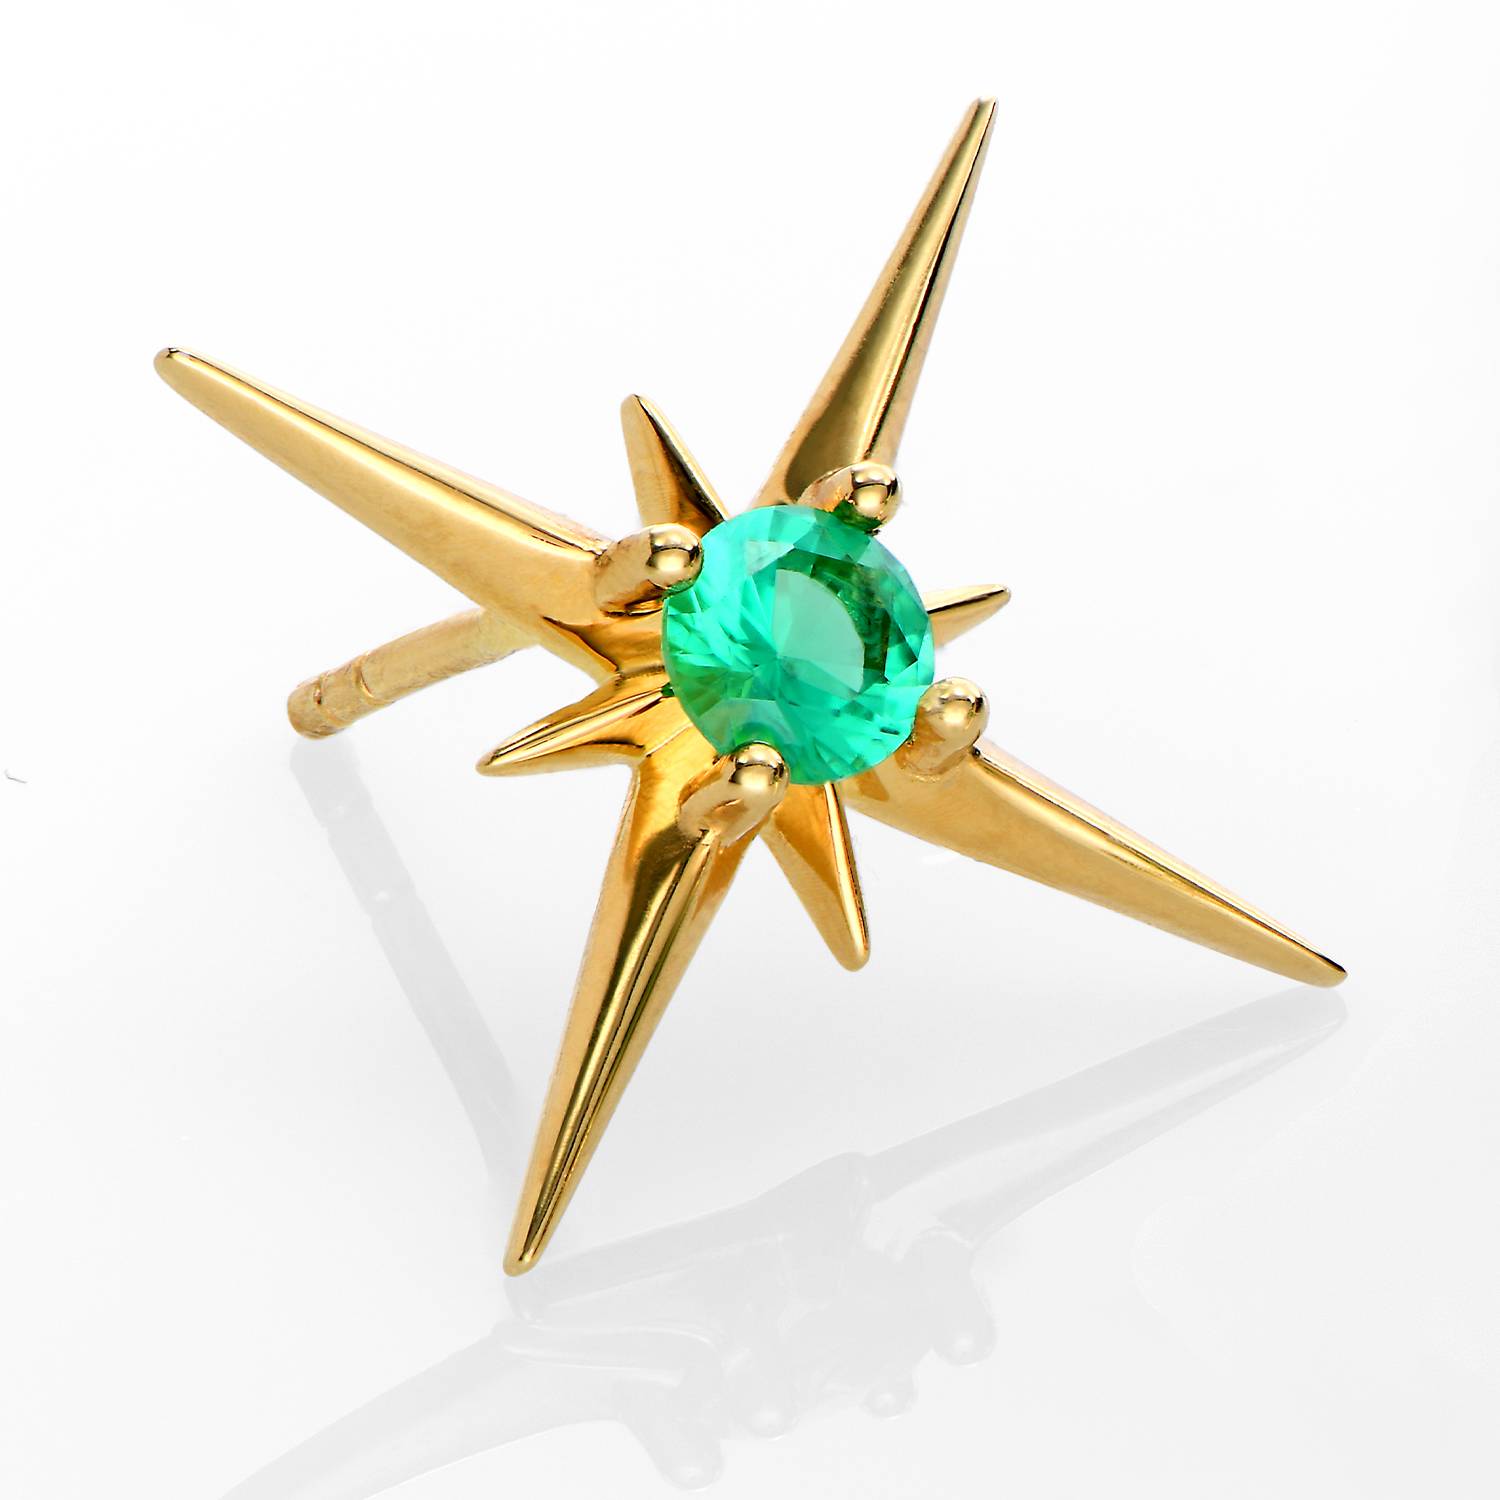 Northern Star Stud Earrings with 0.6 ct Green Emerald Gemstone - Gold Vermeil-4 product photo